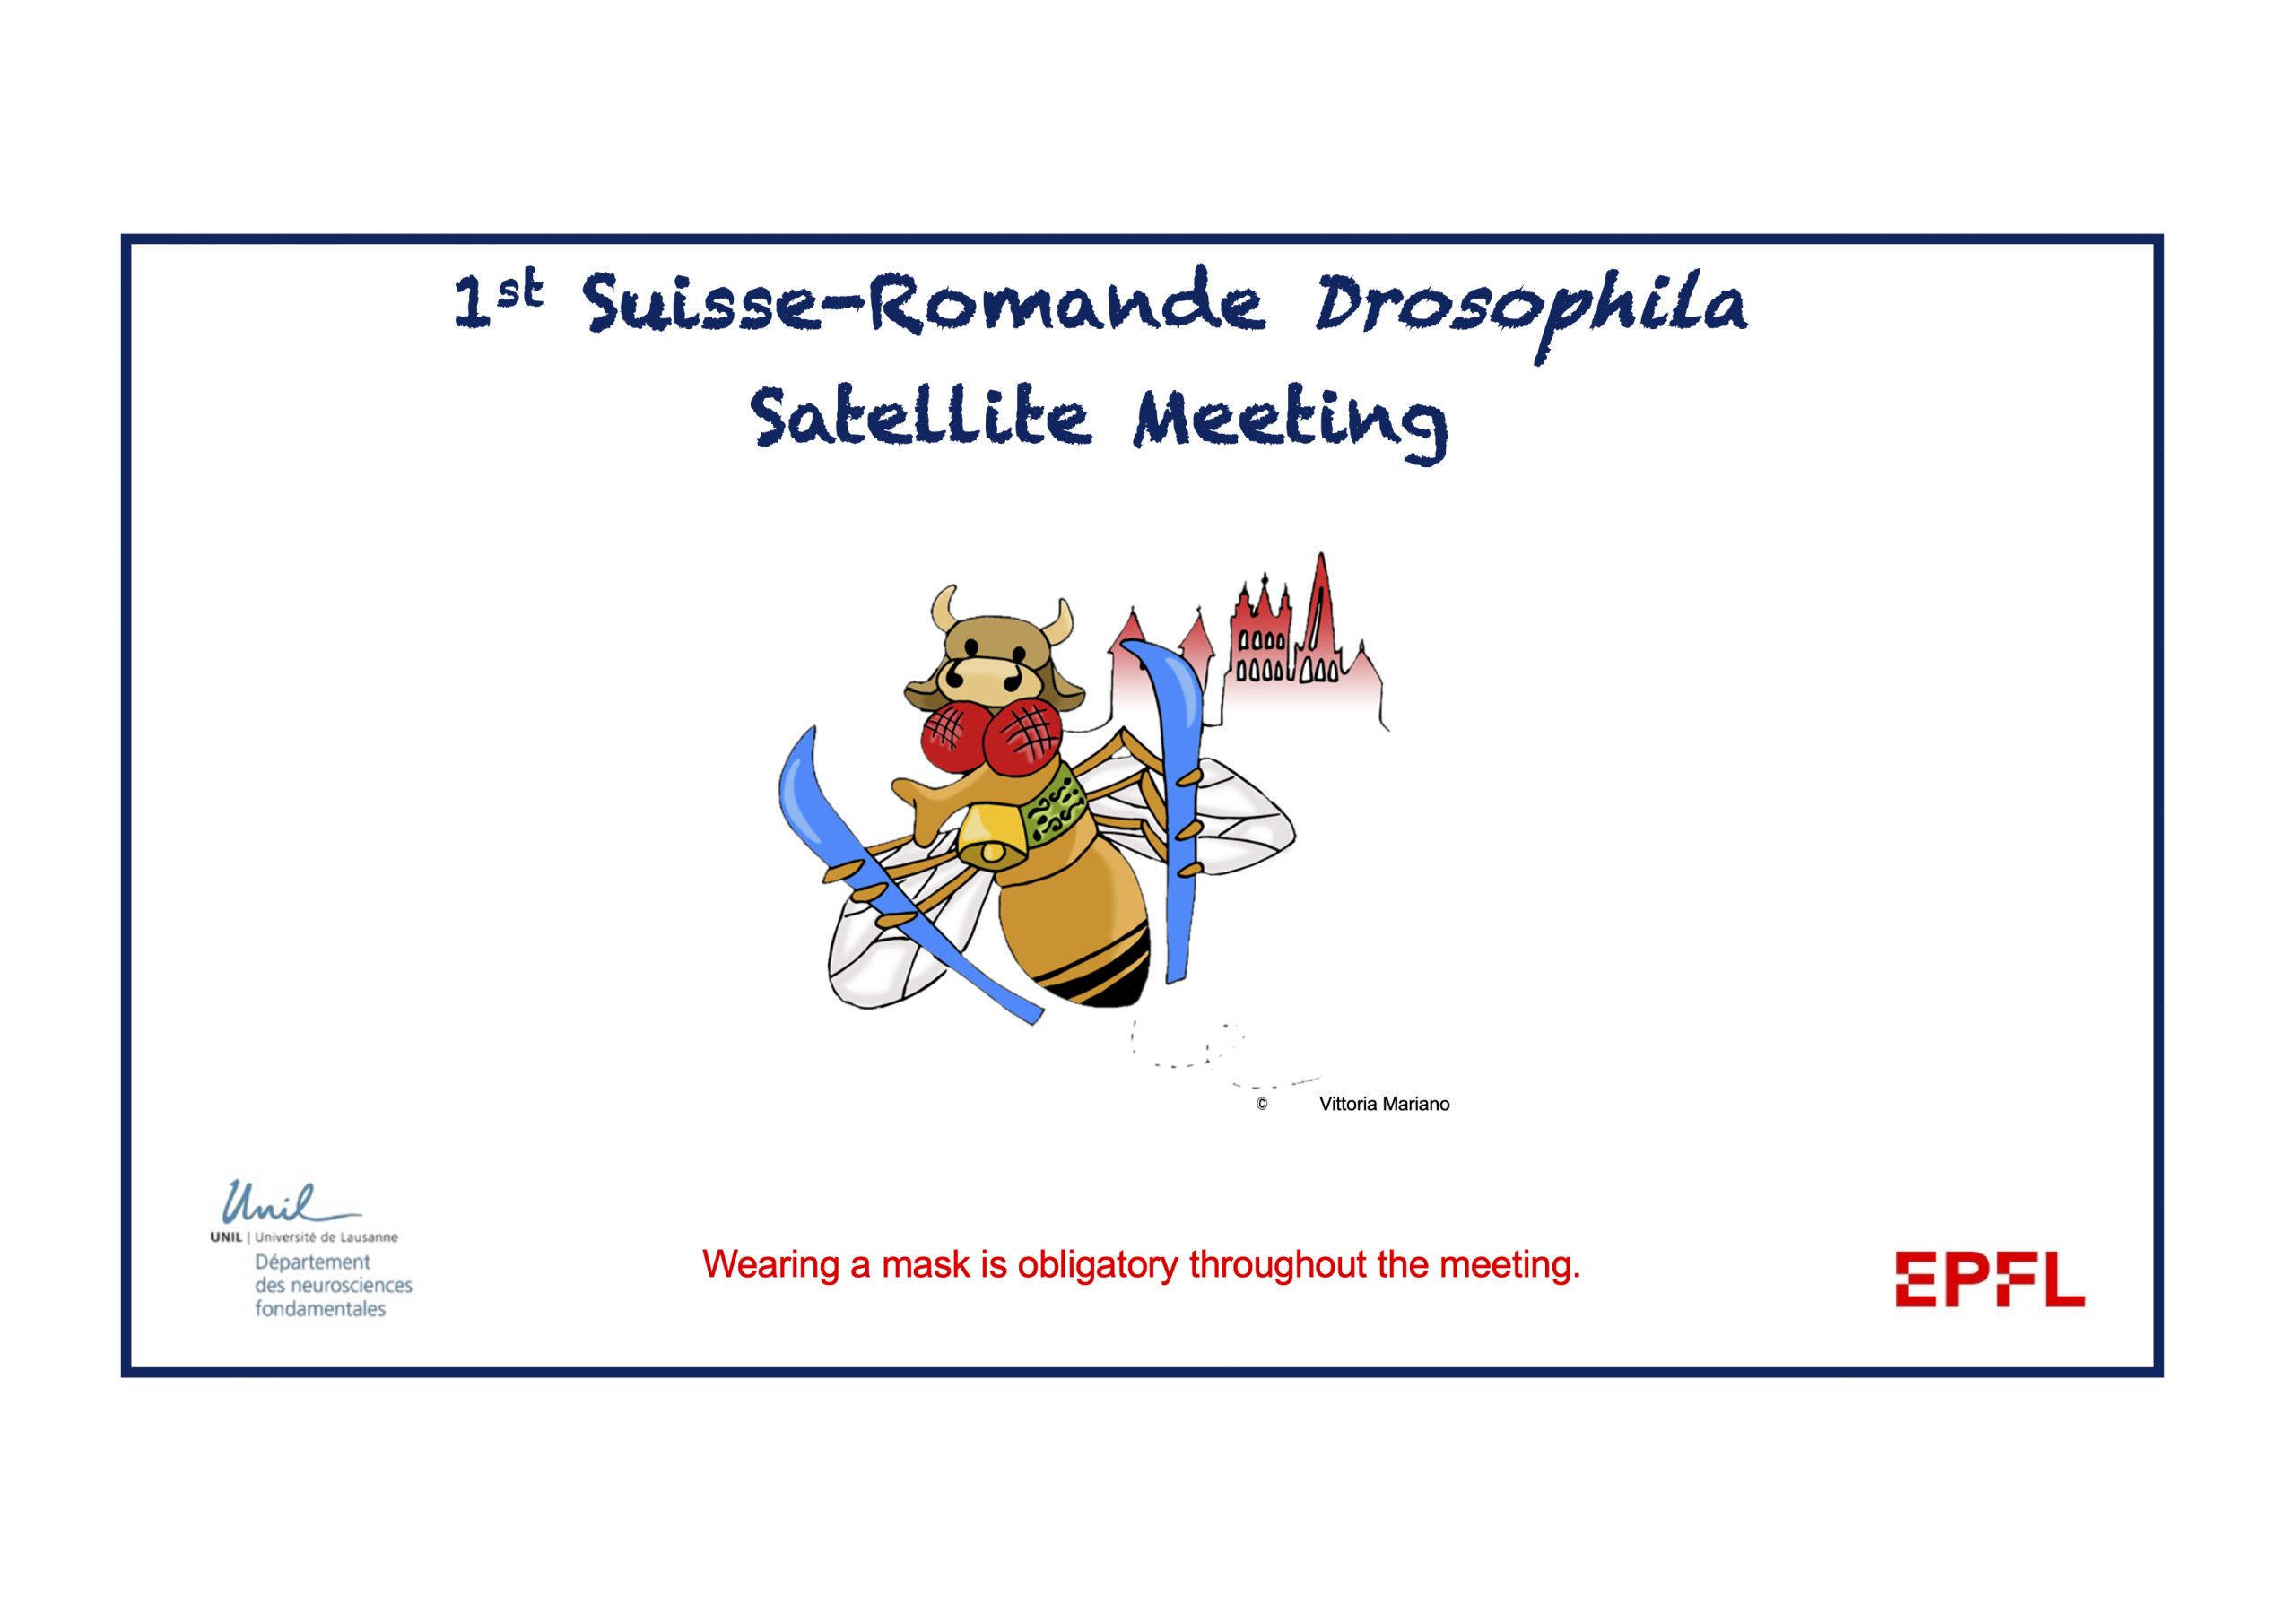 The first Suisse-Romande Drosophila Satellite Meeting takes place at our department